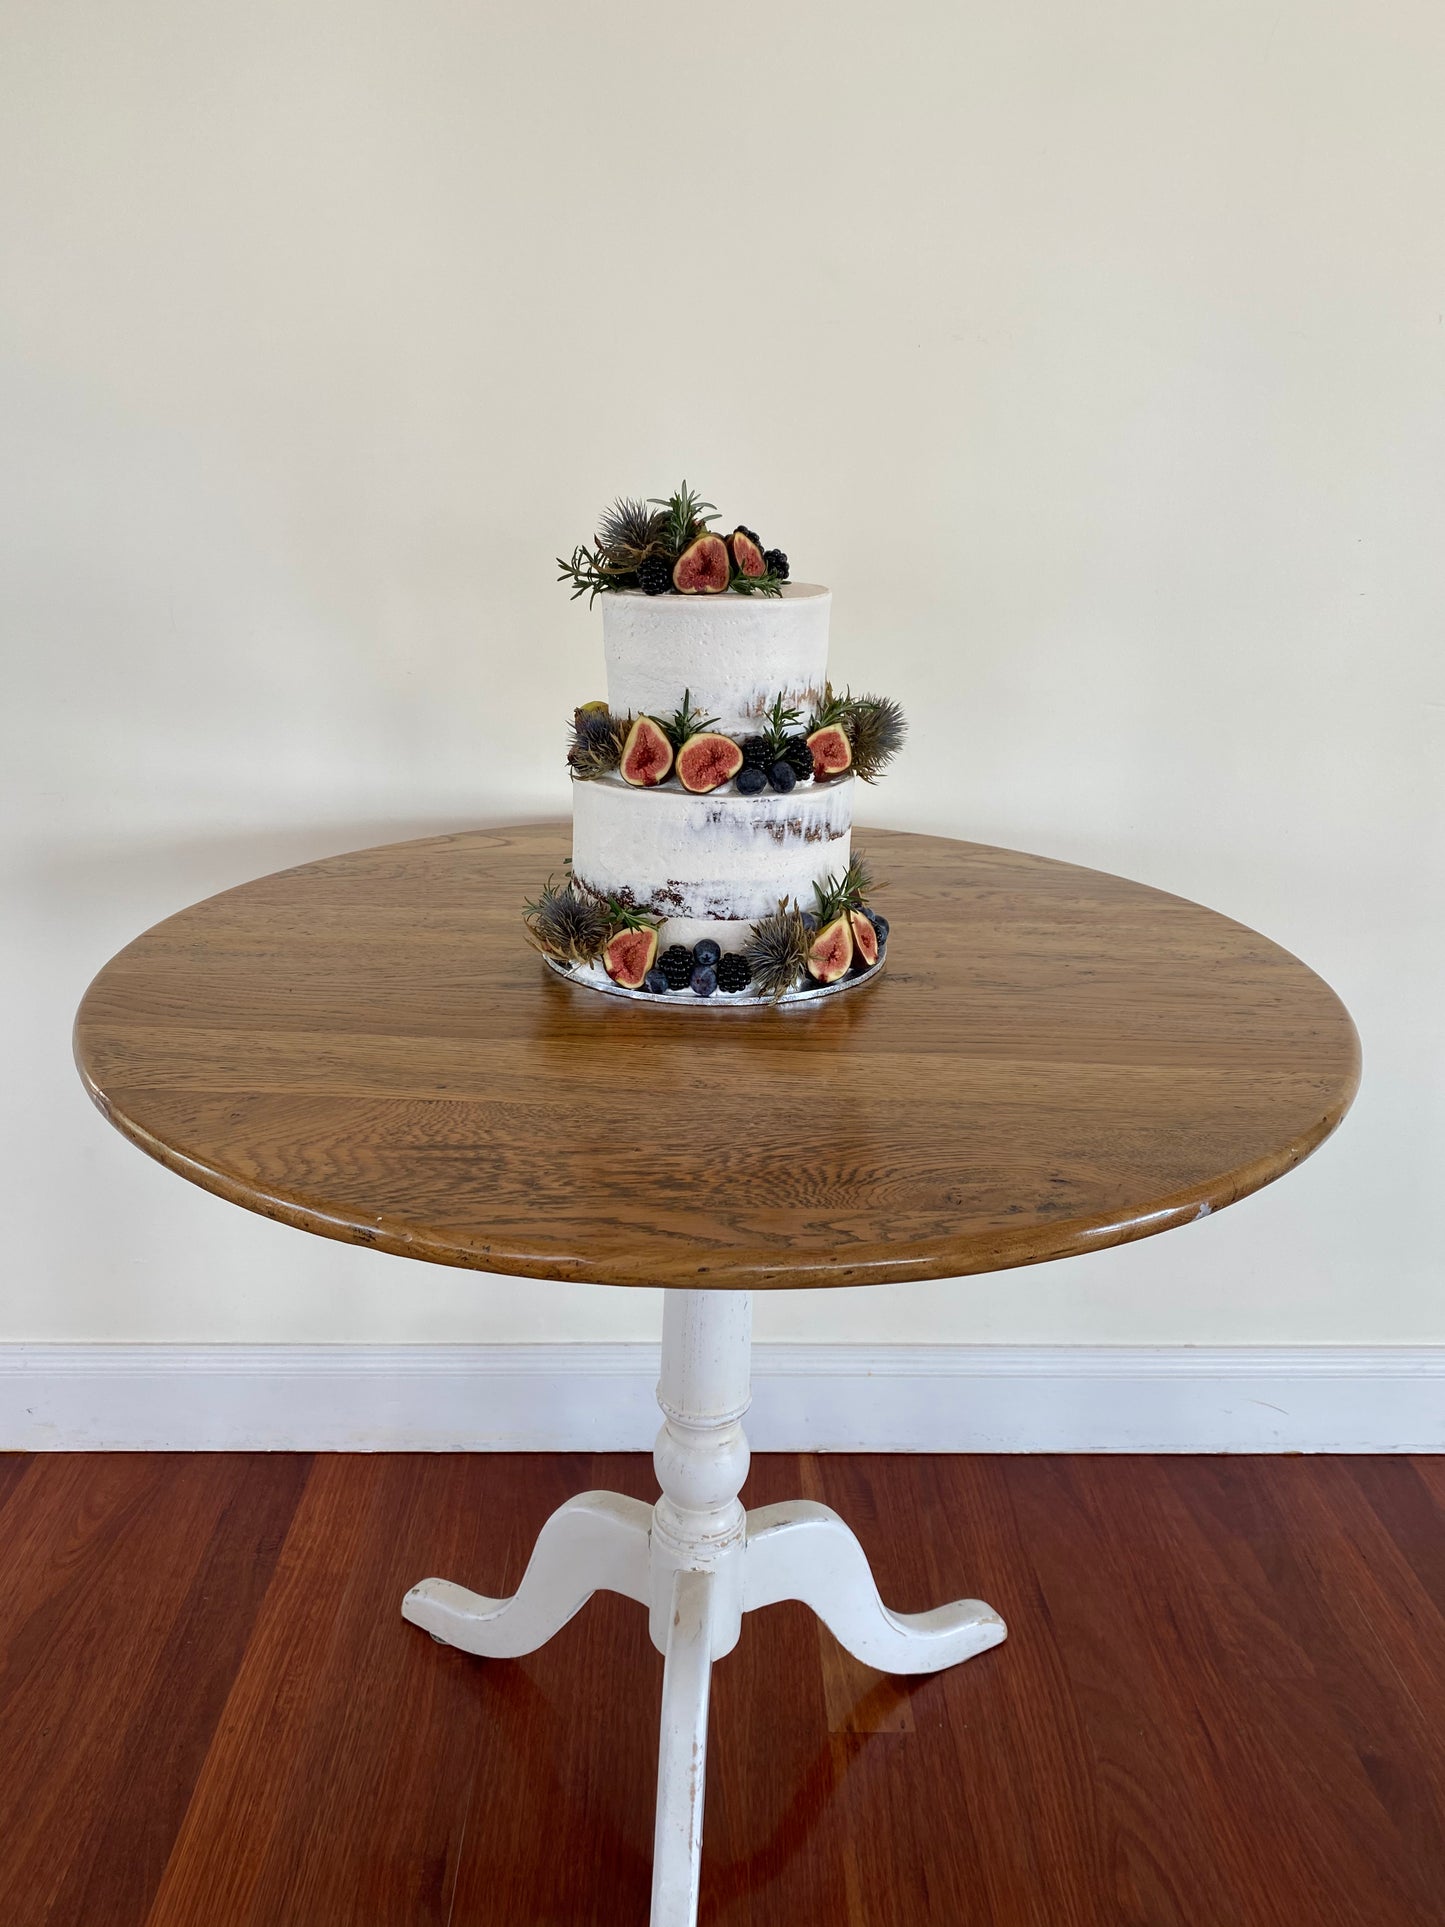 2 Tier Semi Naked cake with Figs & Natives